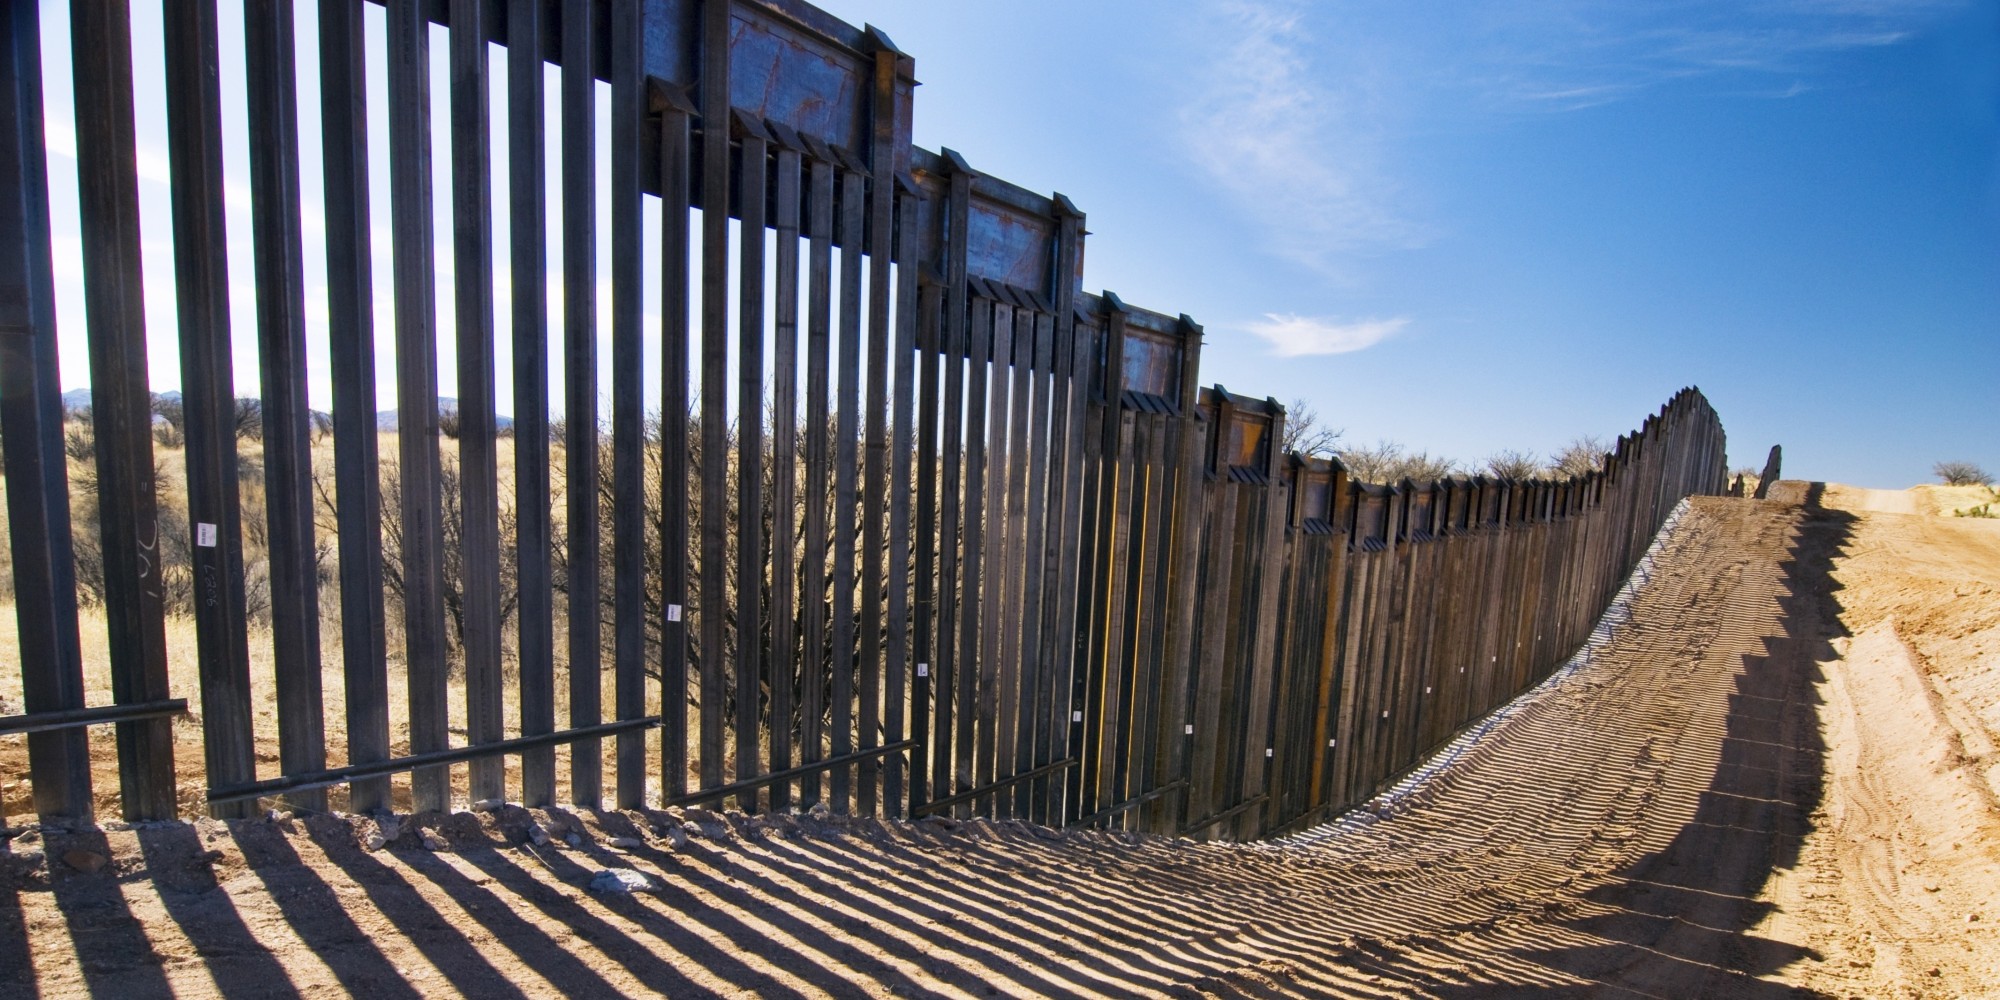 United States border fence, US/Mexico border, east of Nogales, Arizona, USA, viewed from US side